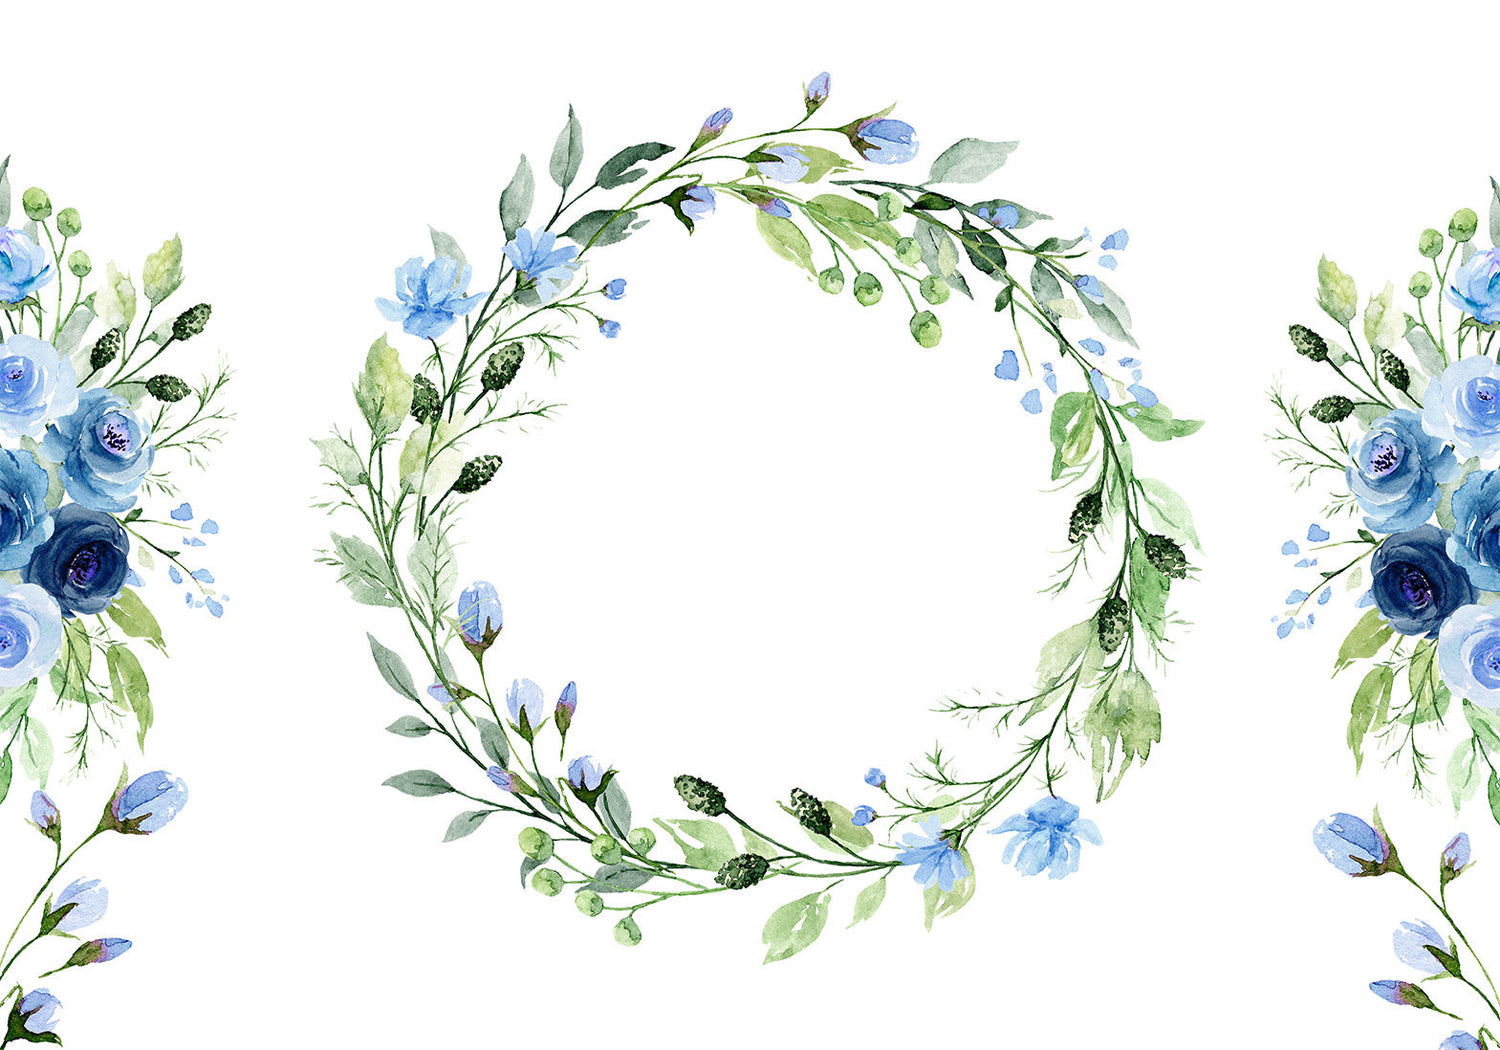 Peel & Stick Floral Wall Mural - Romantic Wreath - Removable Wallpaper